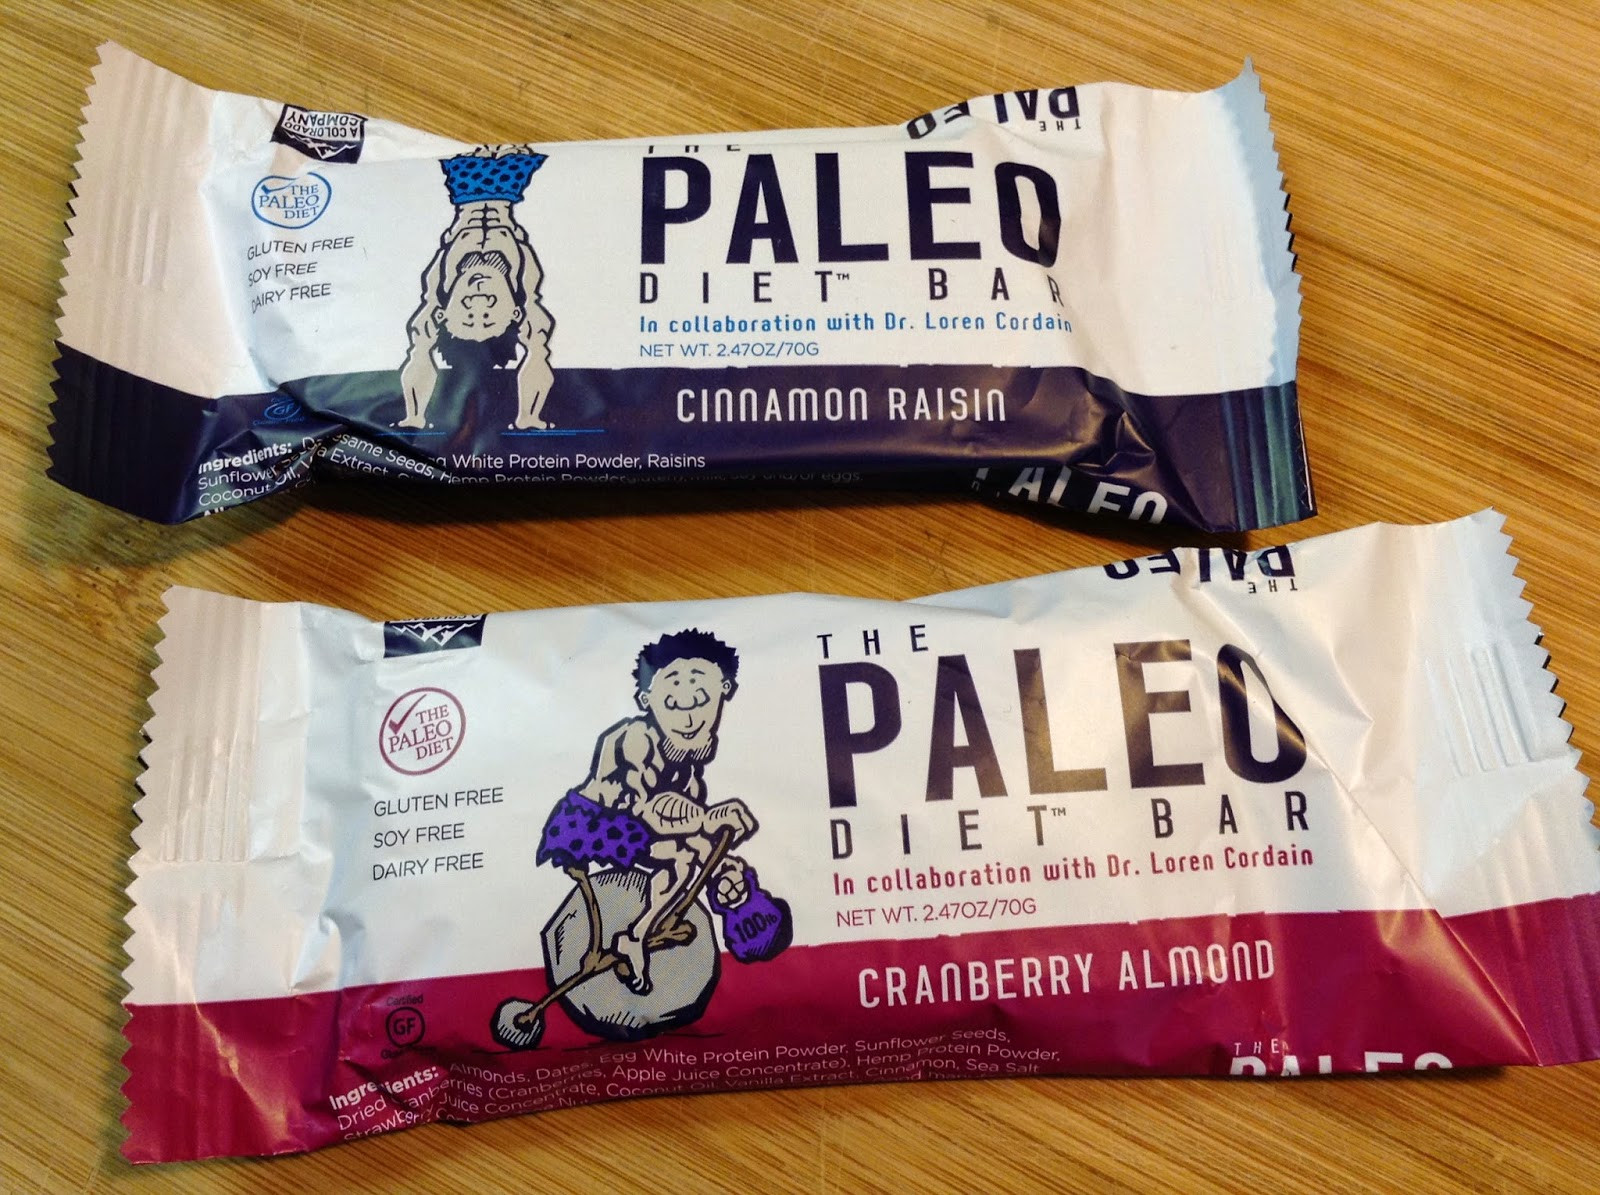 The Paleo Diet Bar
 course we were very curious about what this bar would